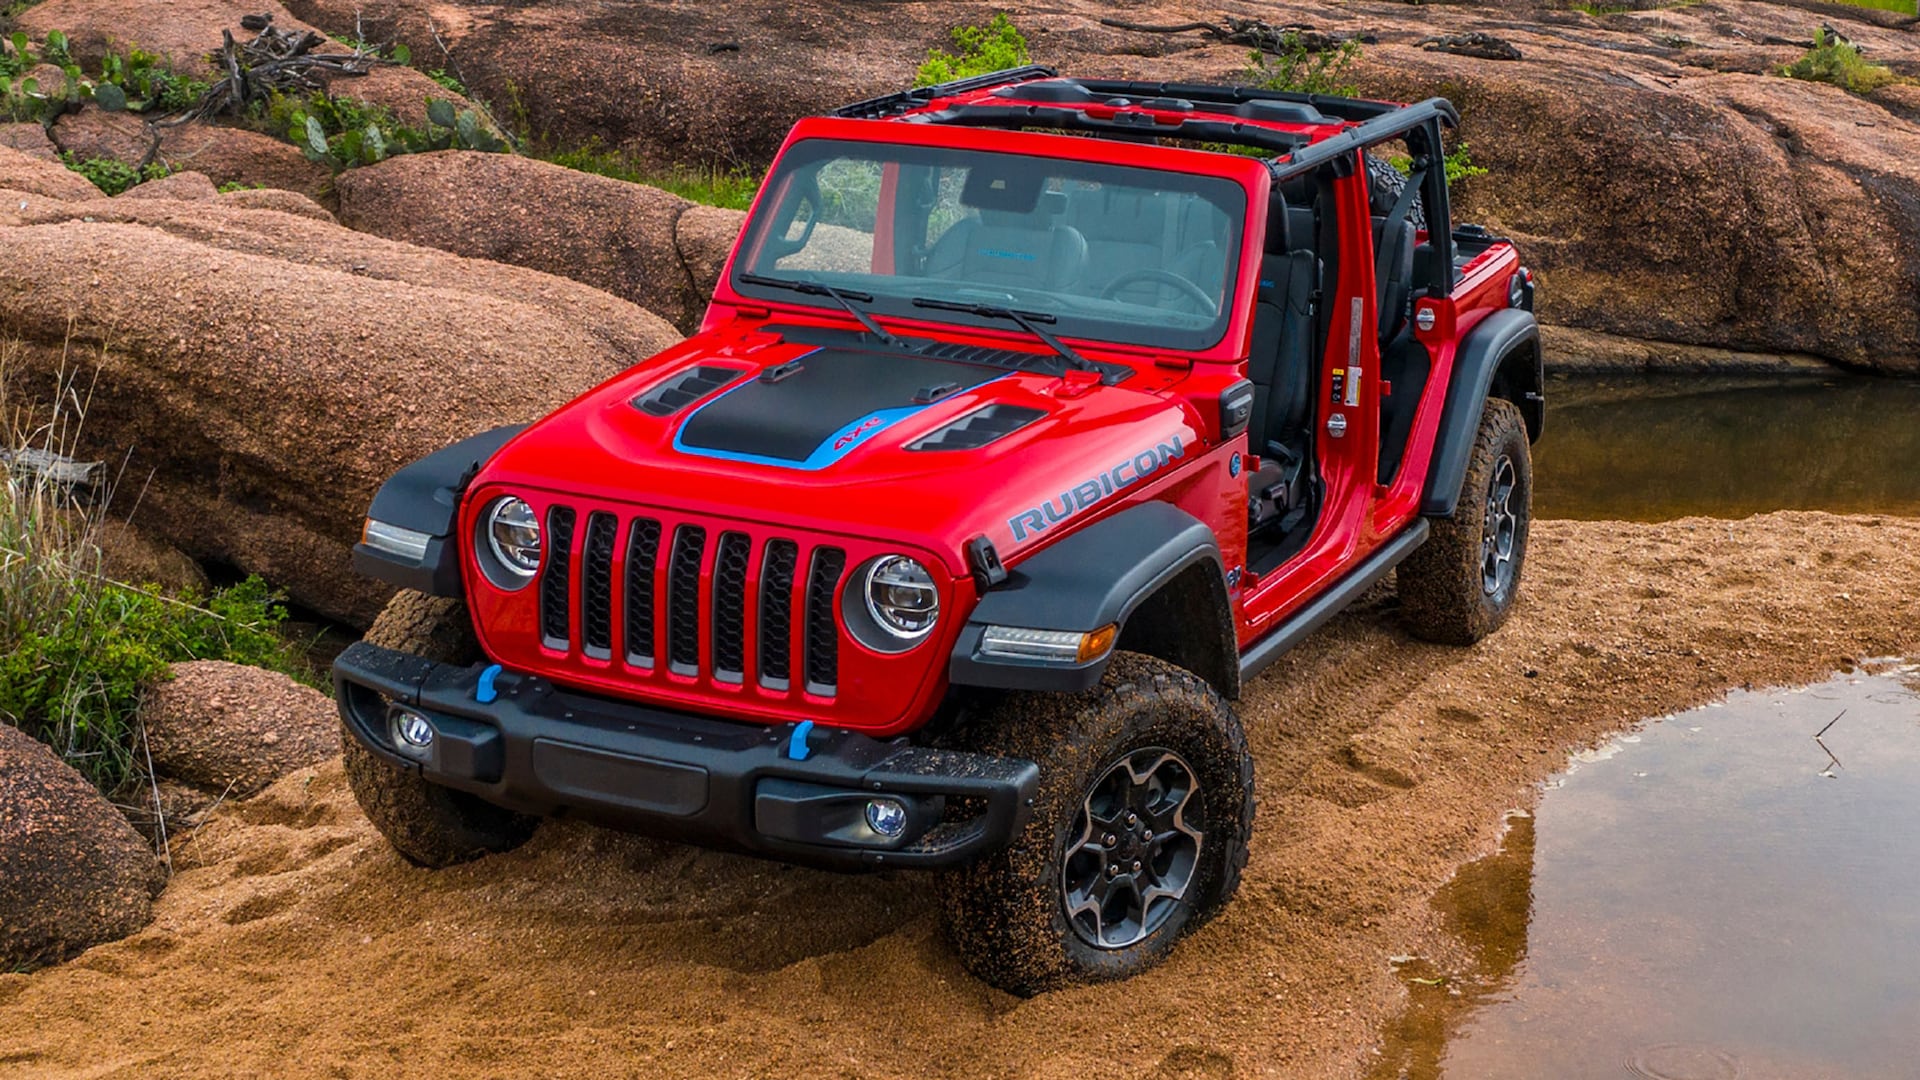 2022 Jeep Wrangler 4xe Prices, Reviews, and Photos - MotorTrend